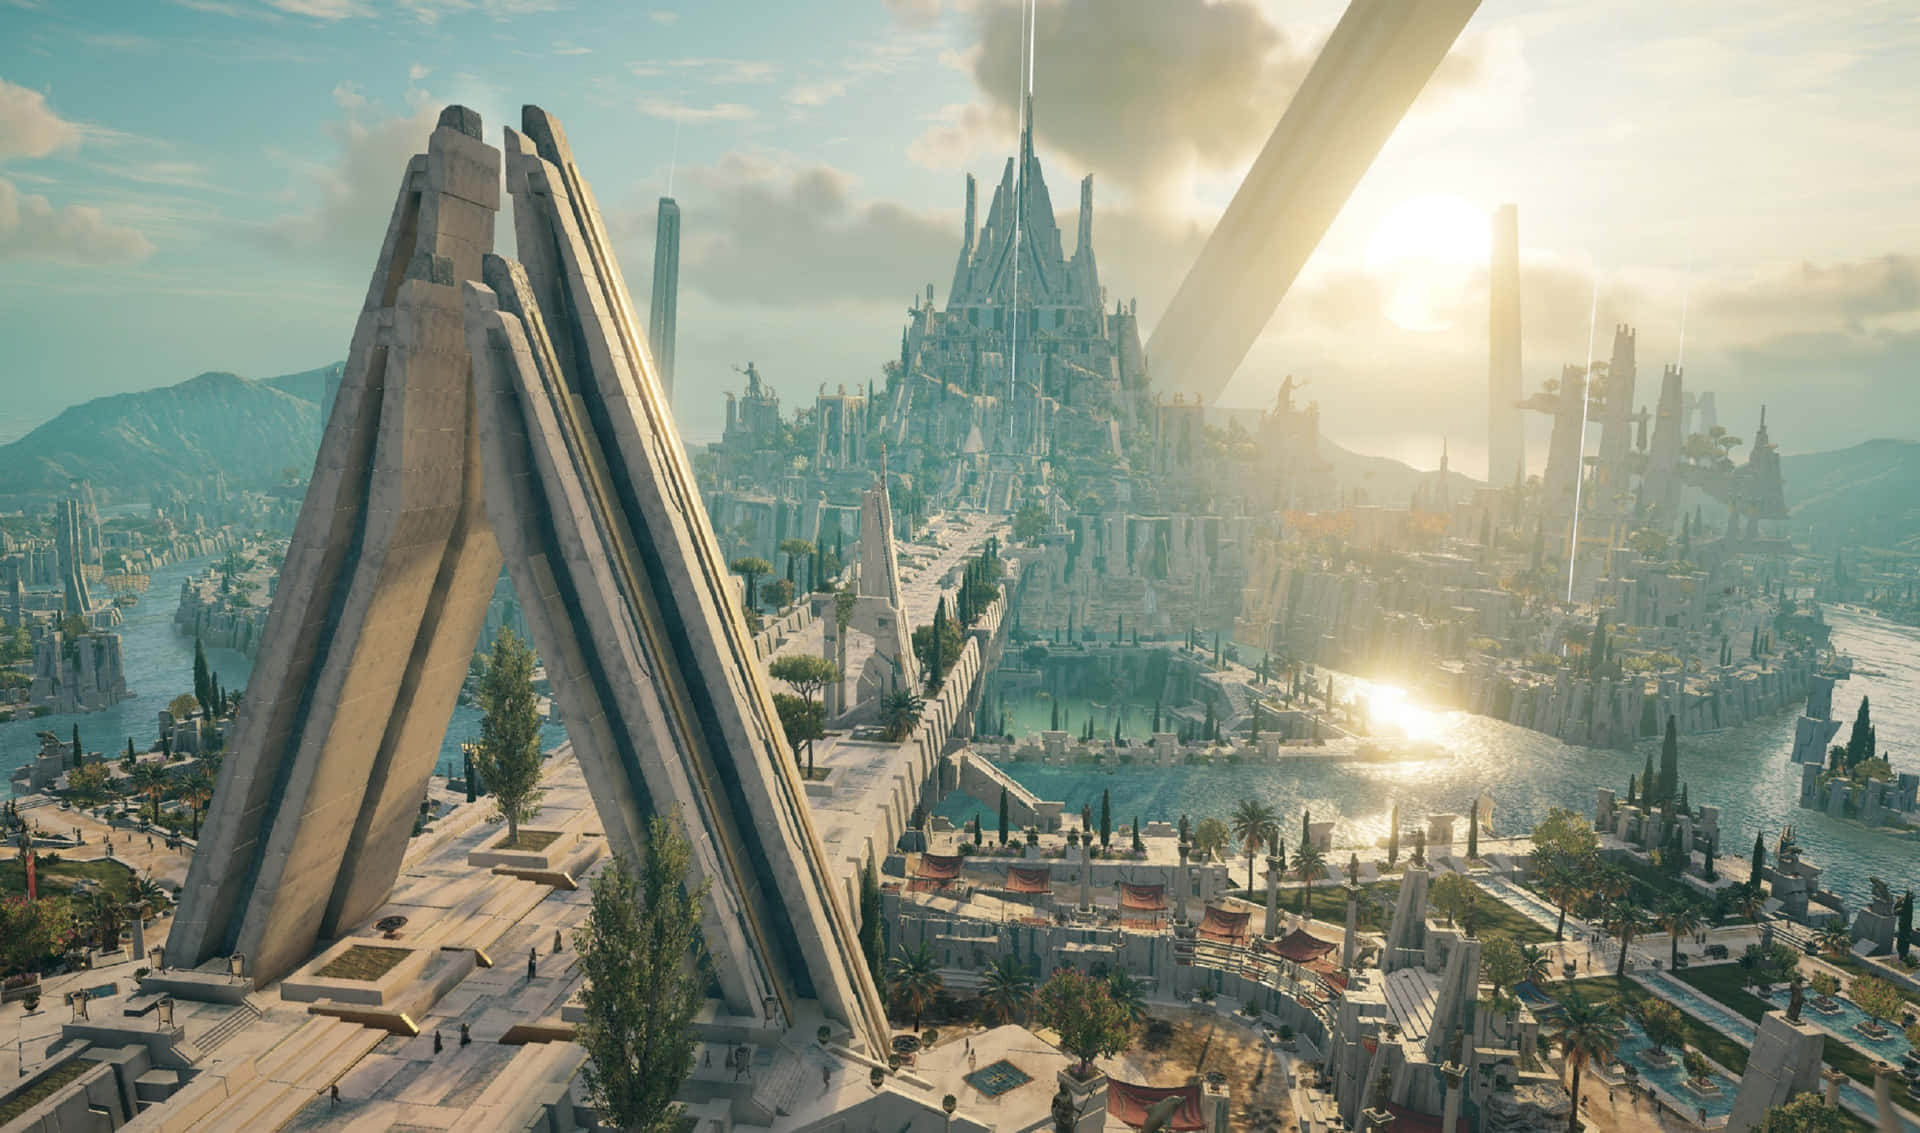 2440x1440 Assassin's Creed Odyssey Background The Fate Of Atlantis DLC